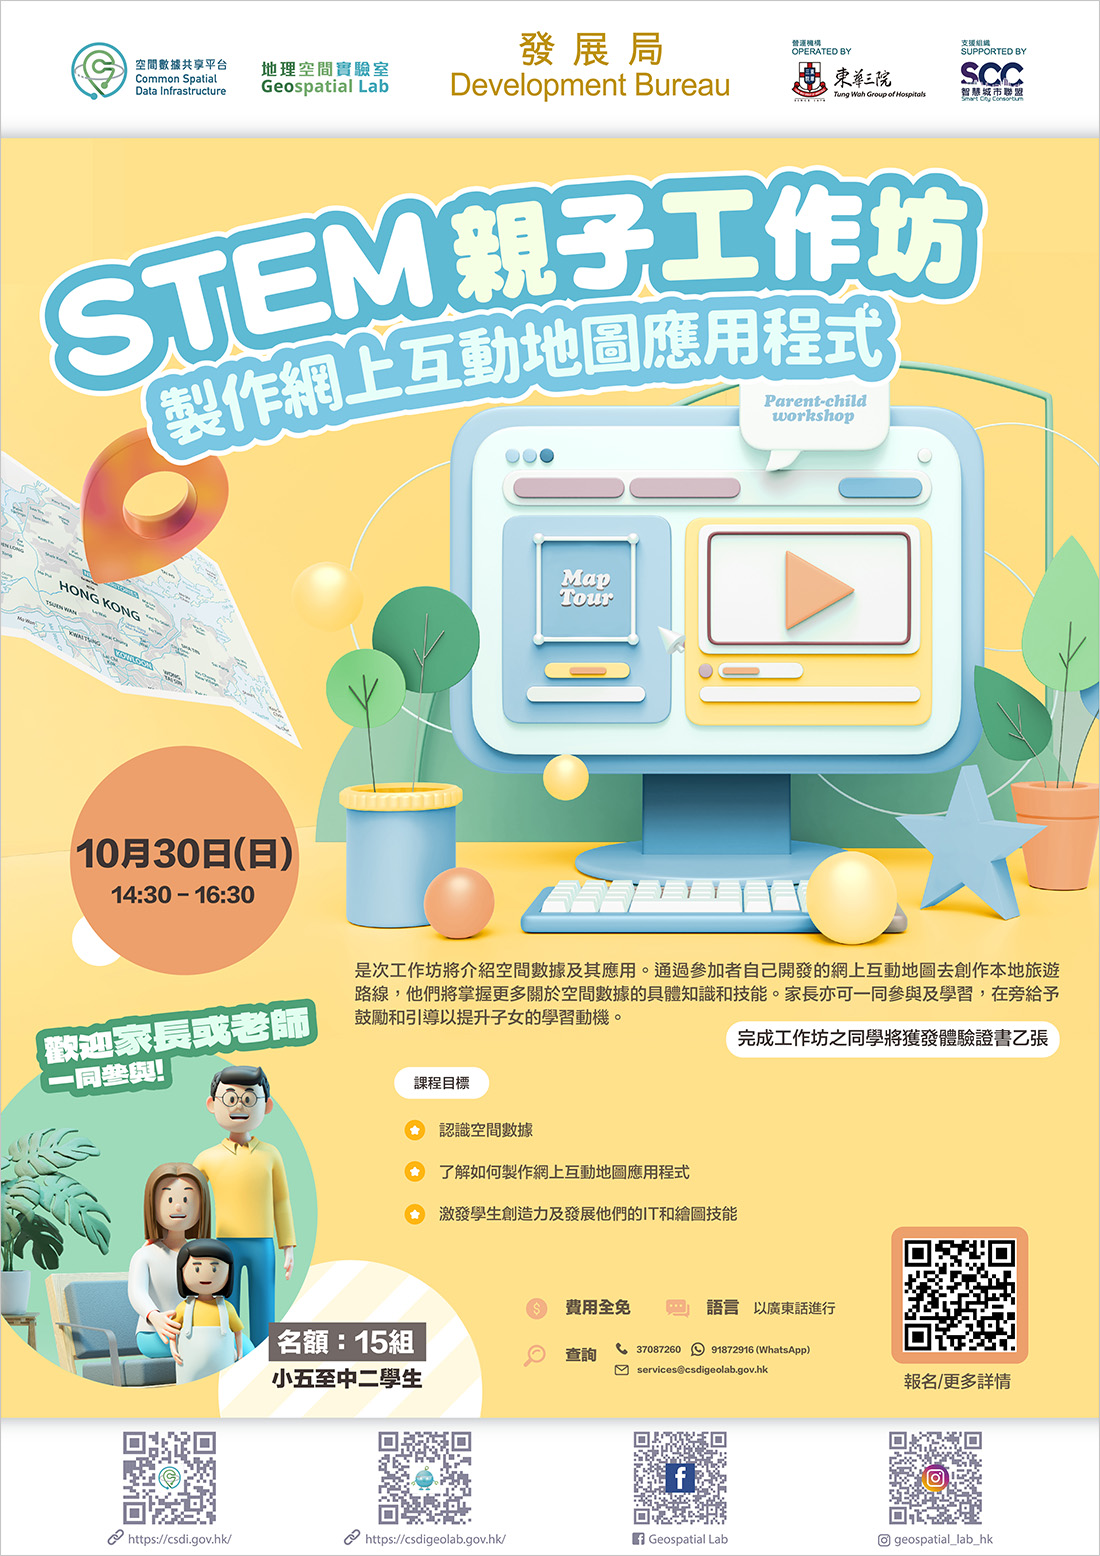 Poster of STEM Parent-child Workshop - Create an Interactive Web Mapping Application